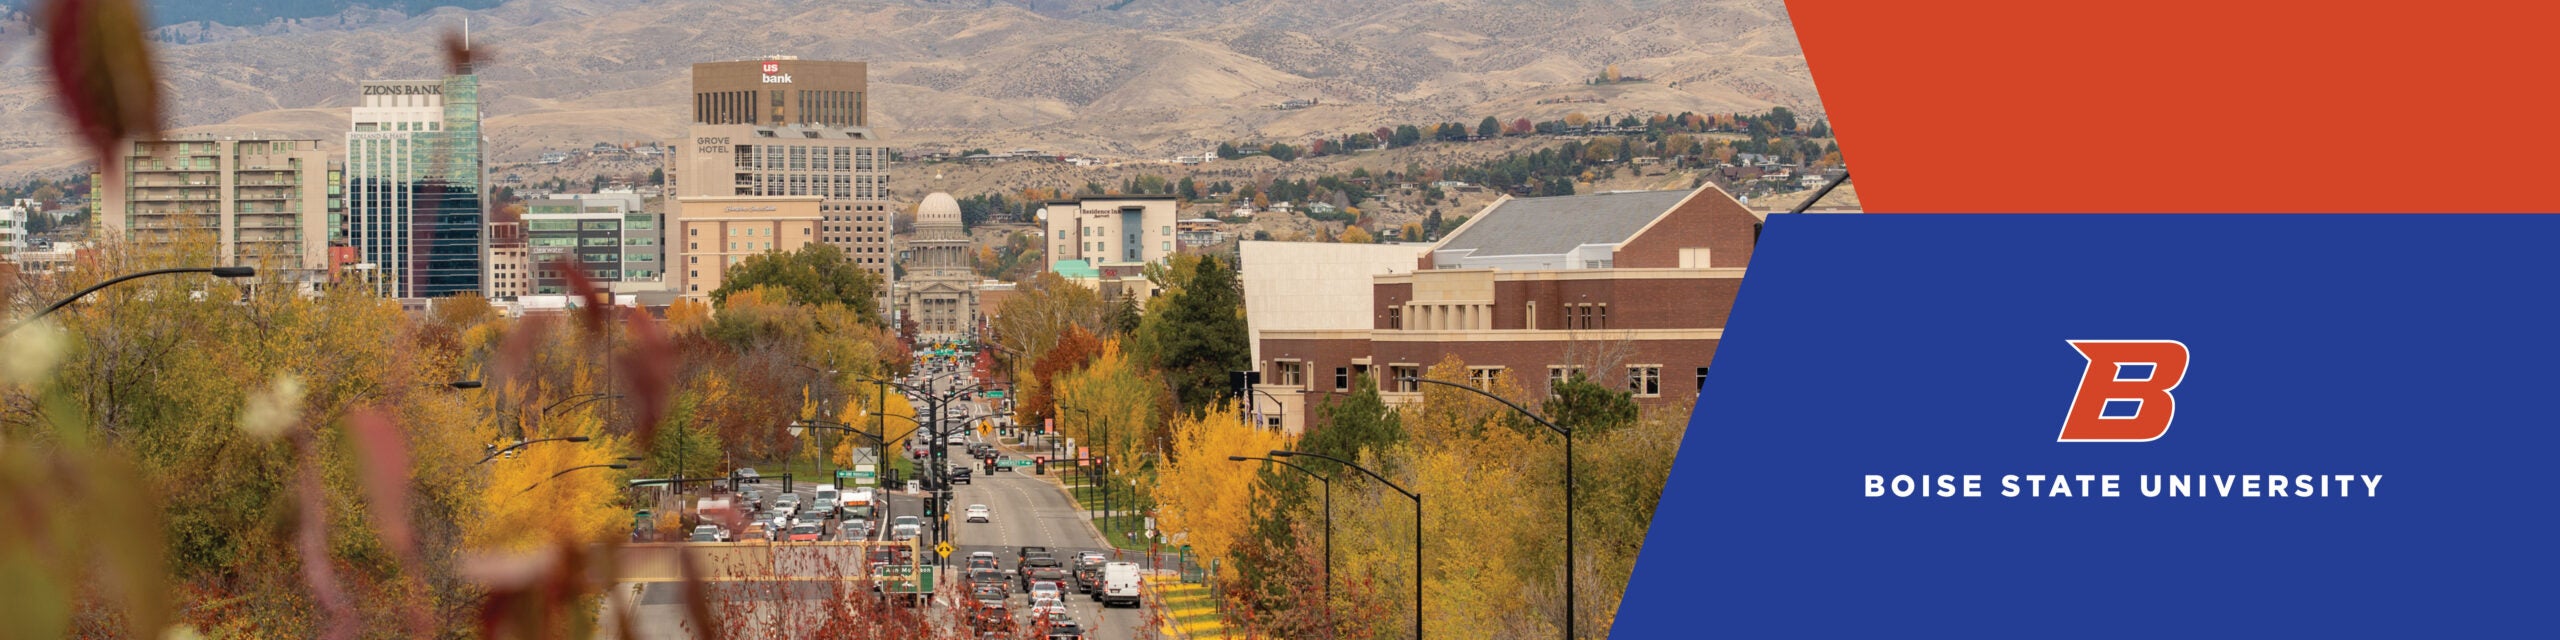 Boise State banner image for LinkedIn. Includes photo of downtown Boise and Boise State logo